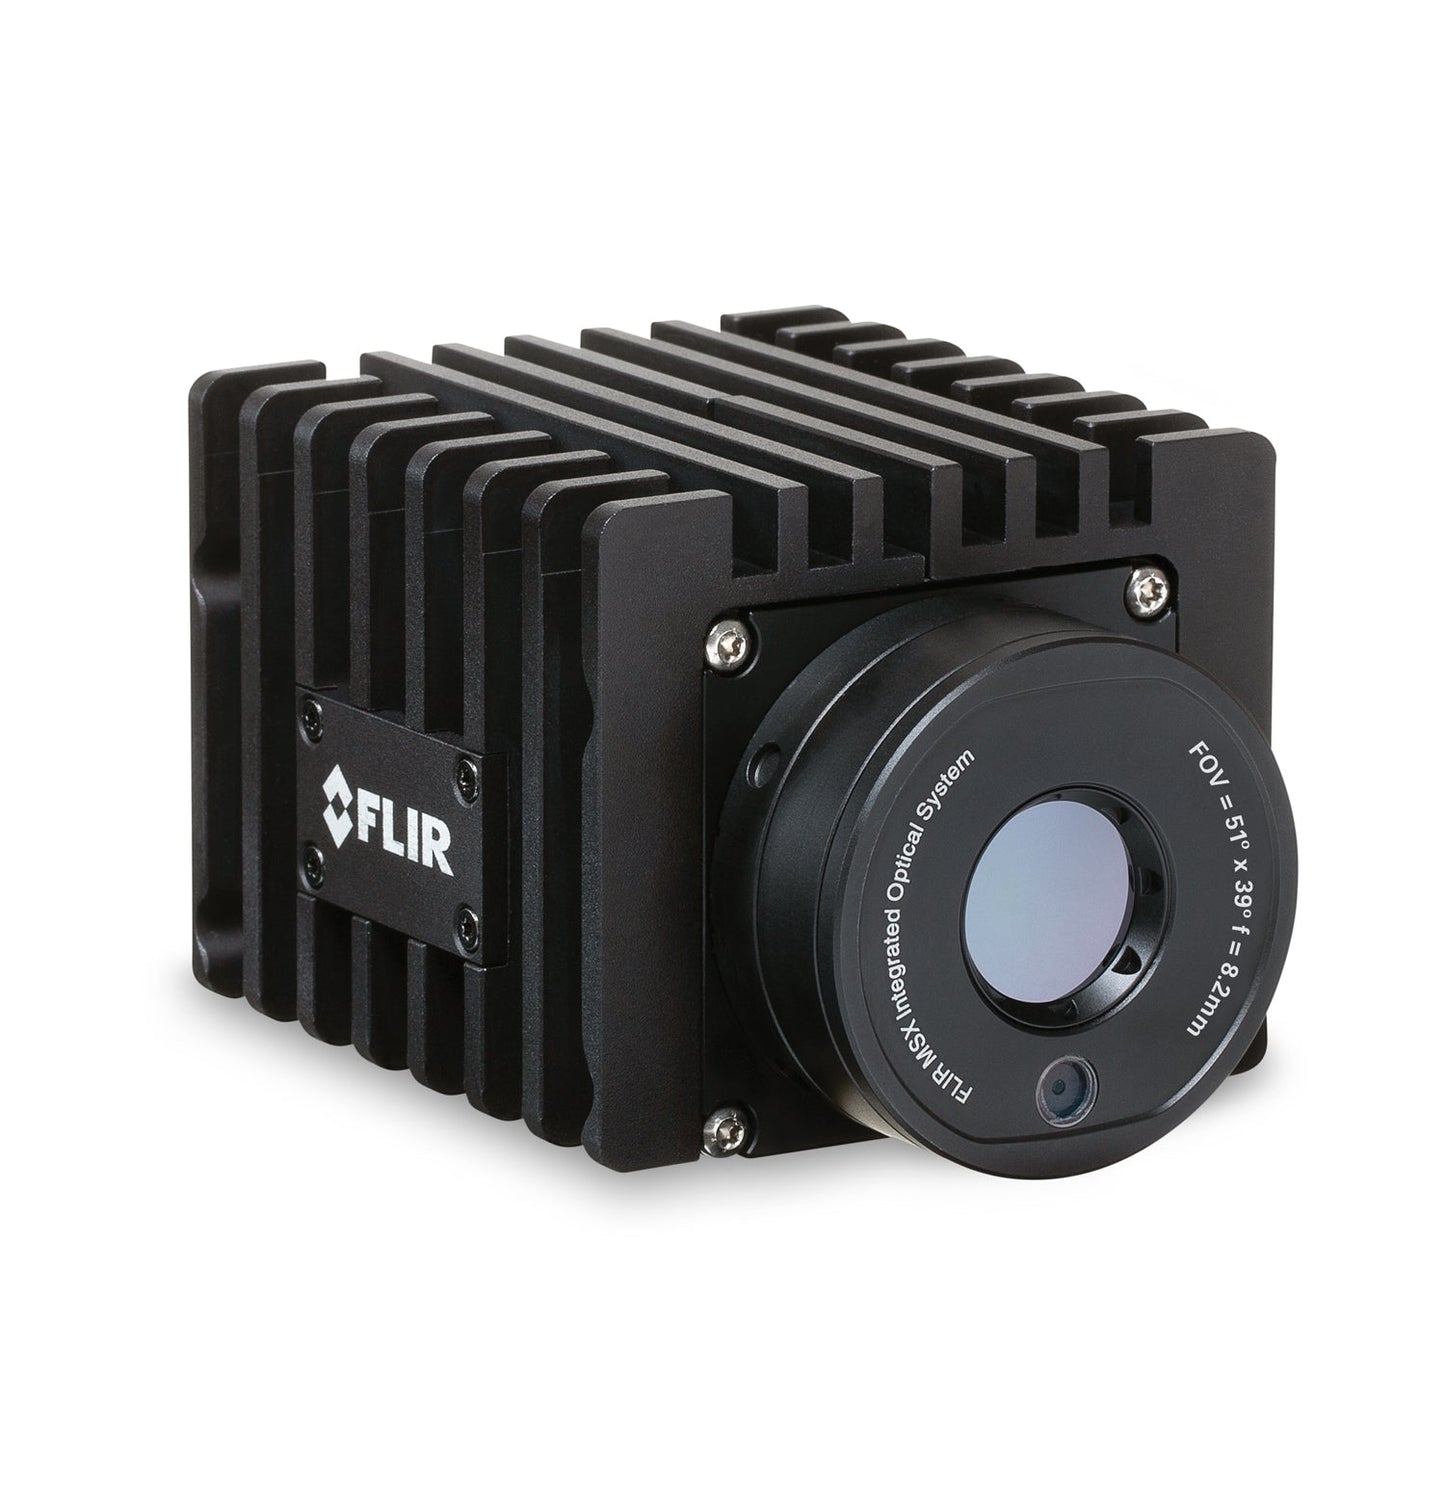 Hire One Day - Teledyne FLIR - A50 29° Professional Science Kit